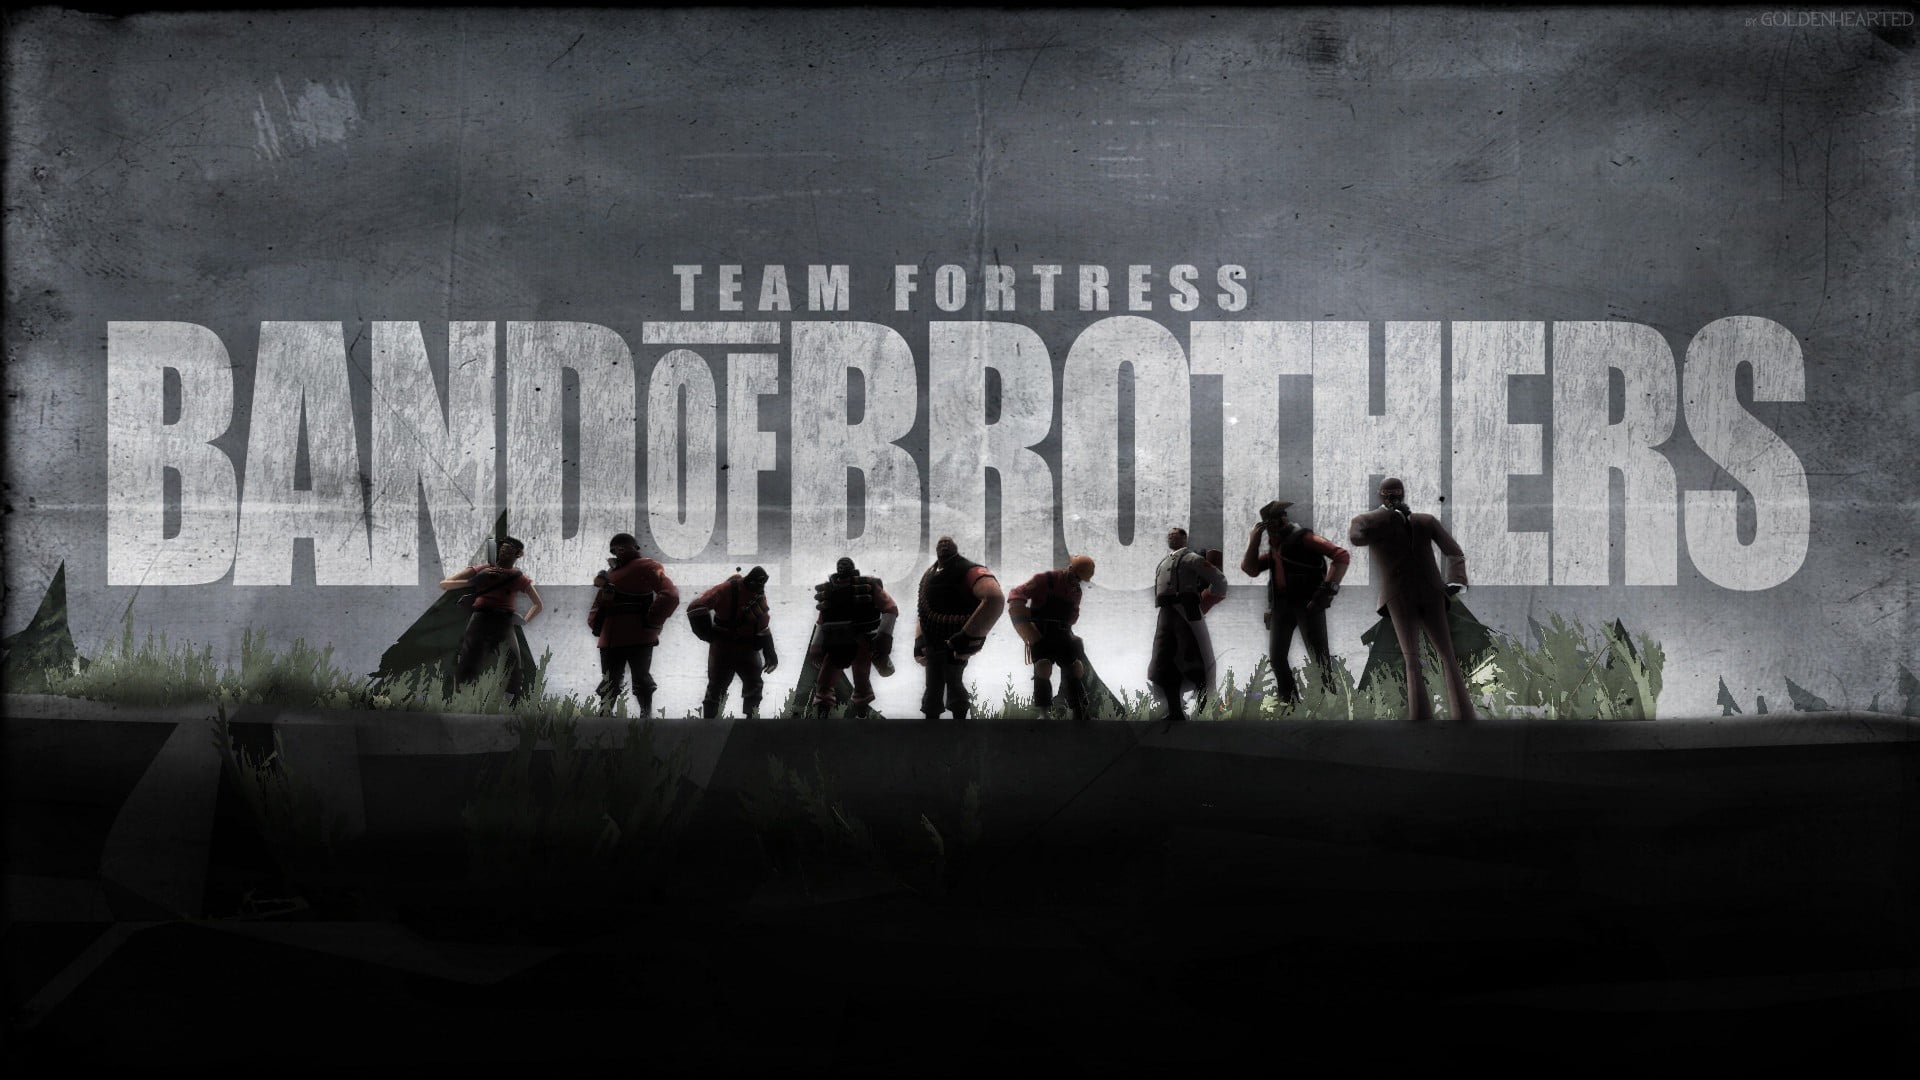 Team Fortress Band of Brothers digital wallpaper